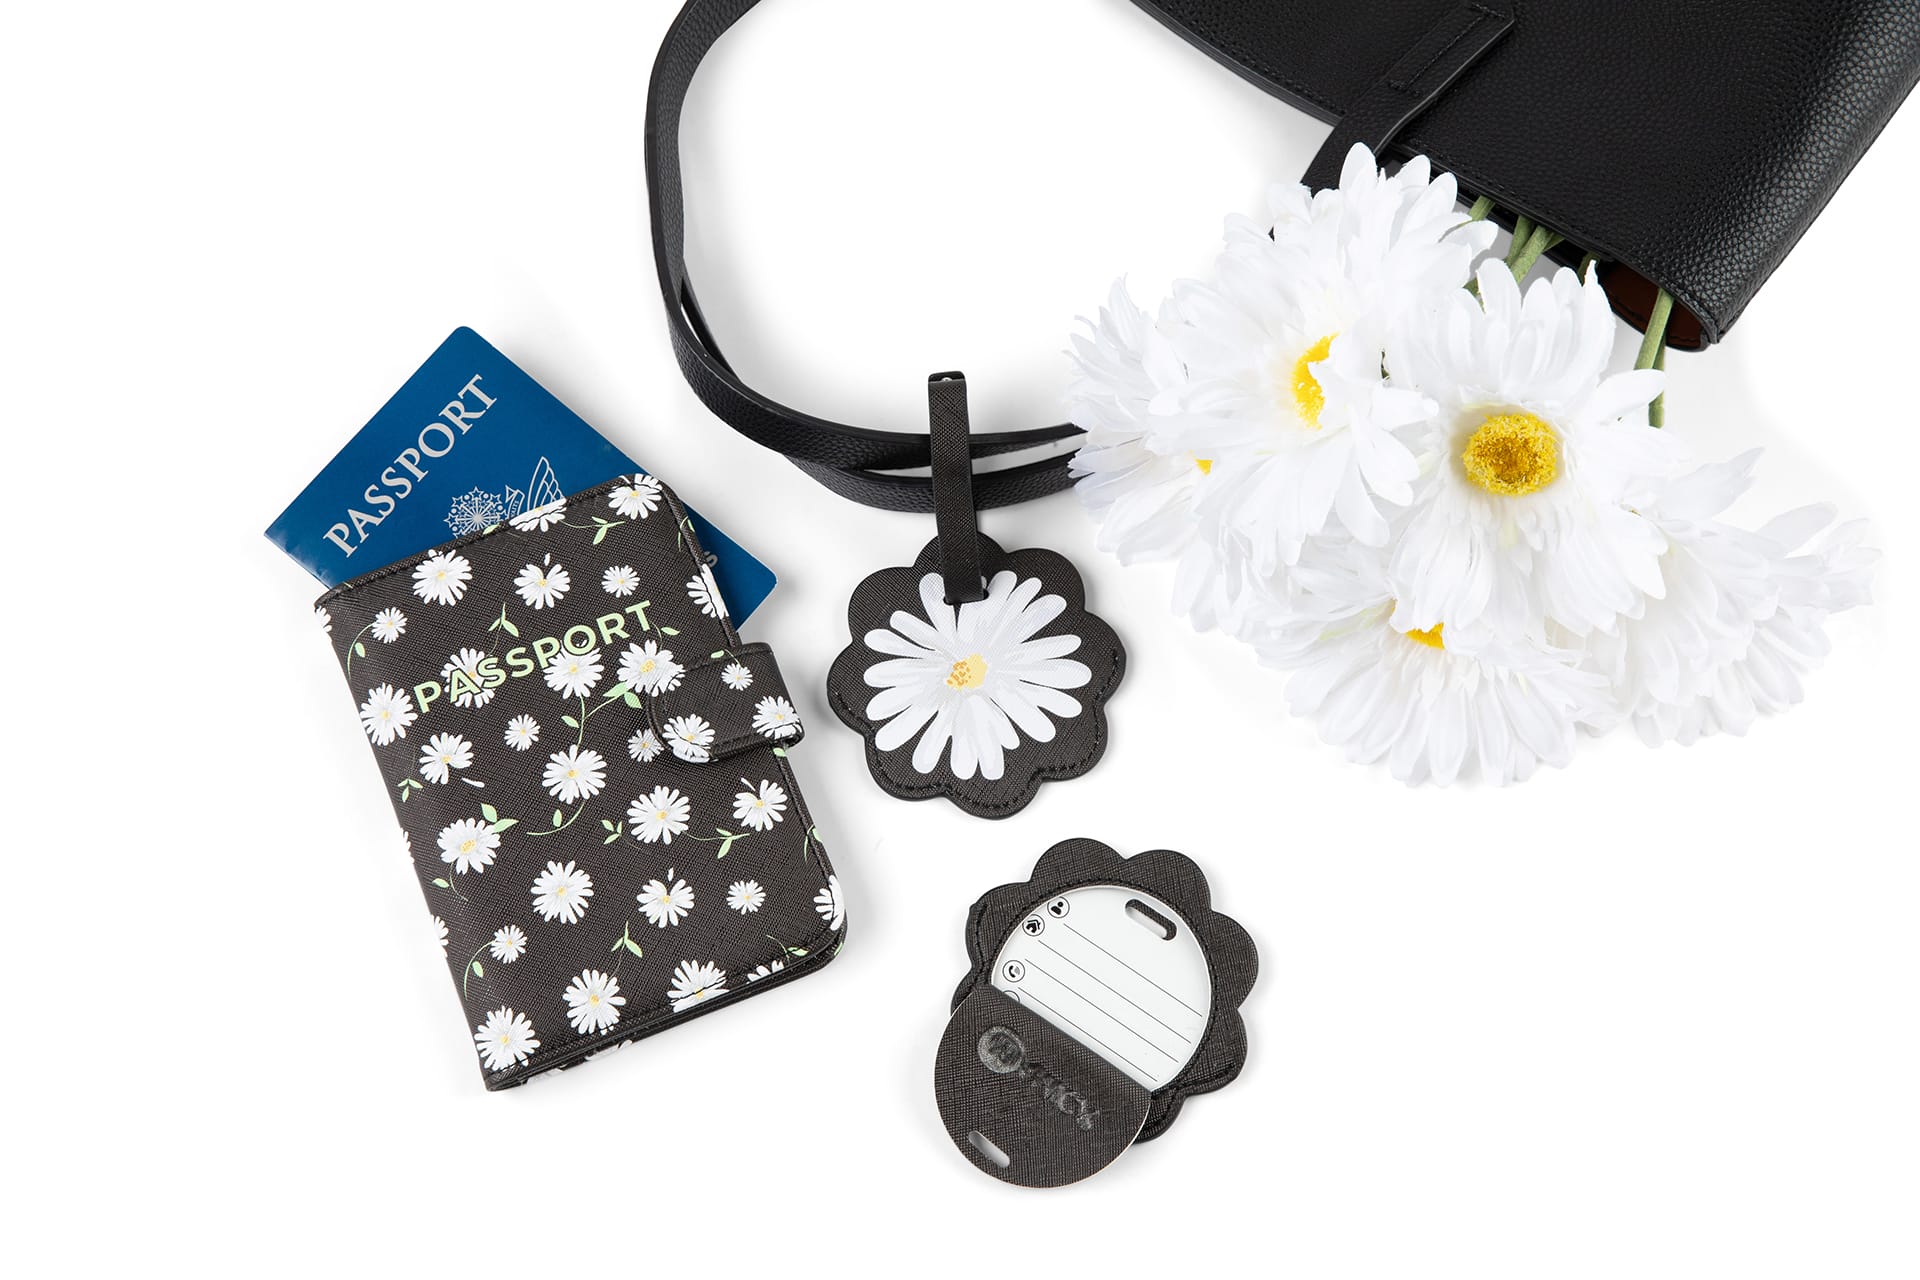 A black passport case with daisy motif is on left. Two daisy-shaped luggage tags are on right.